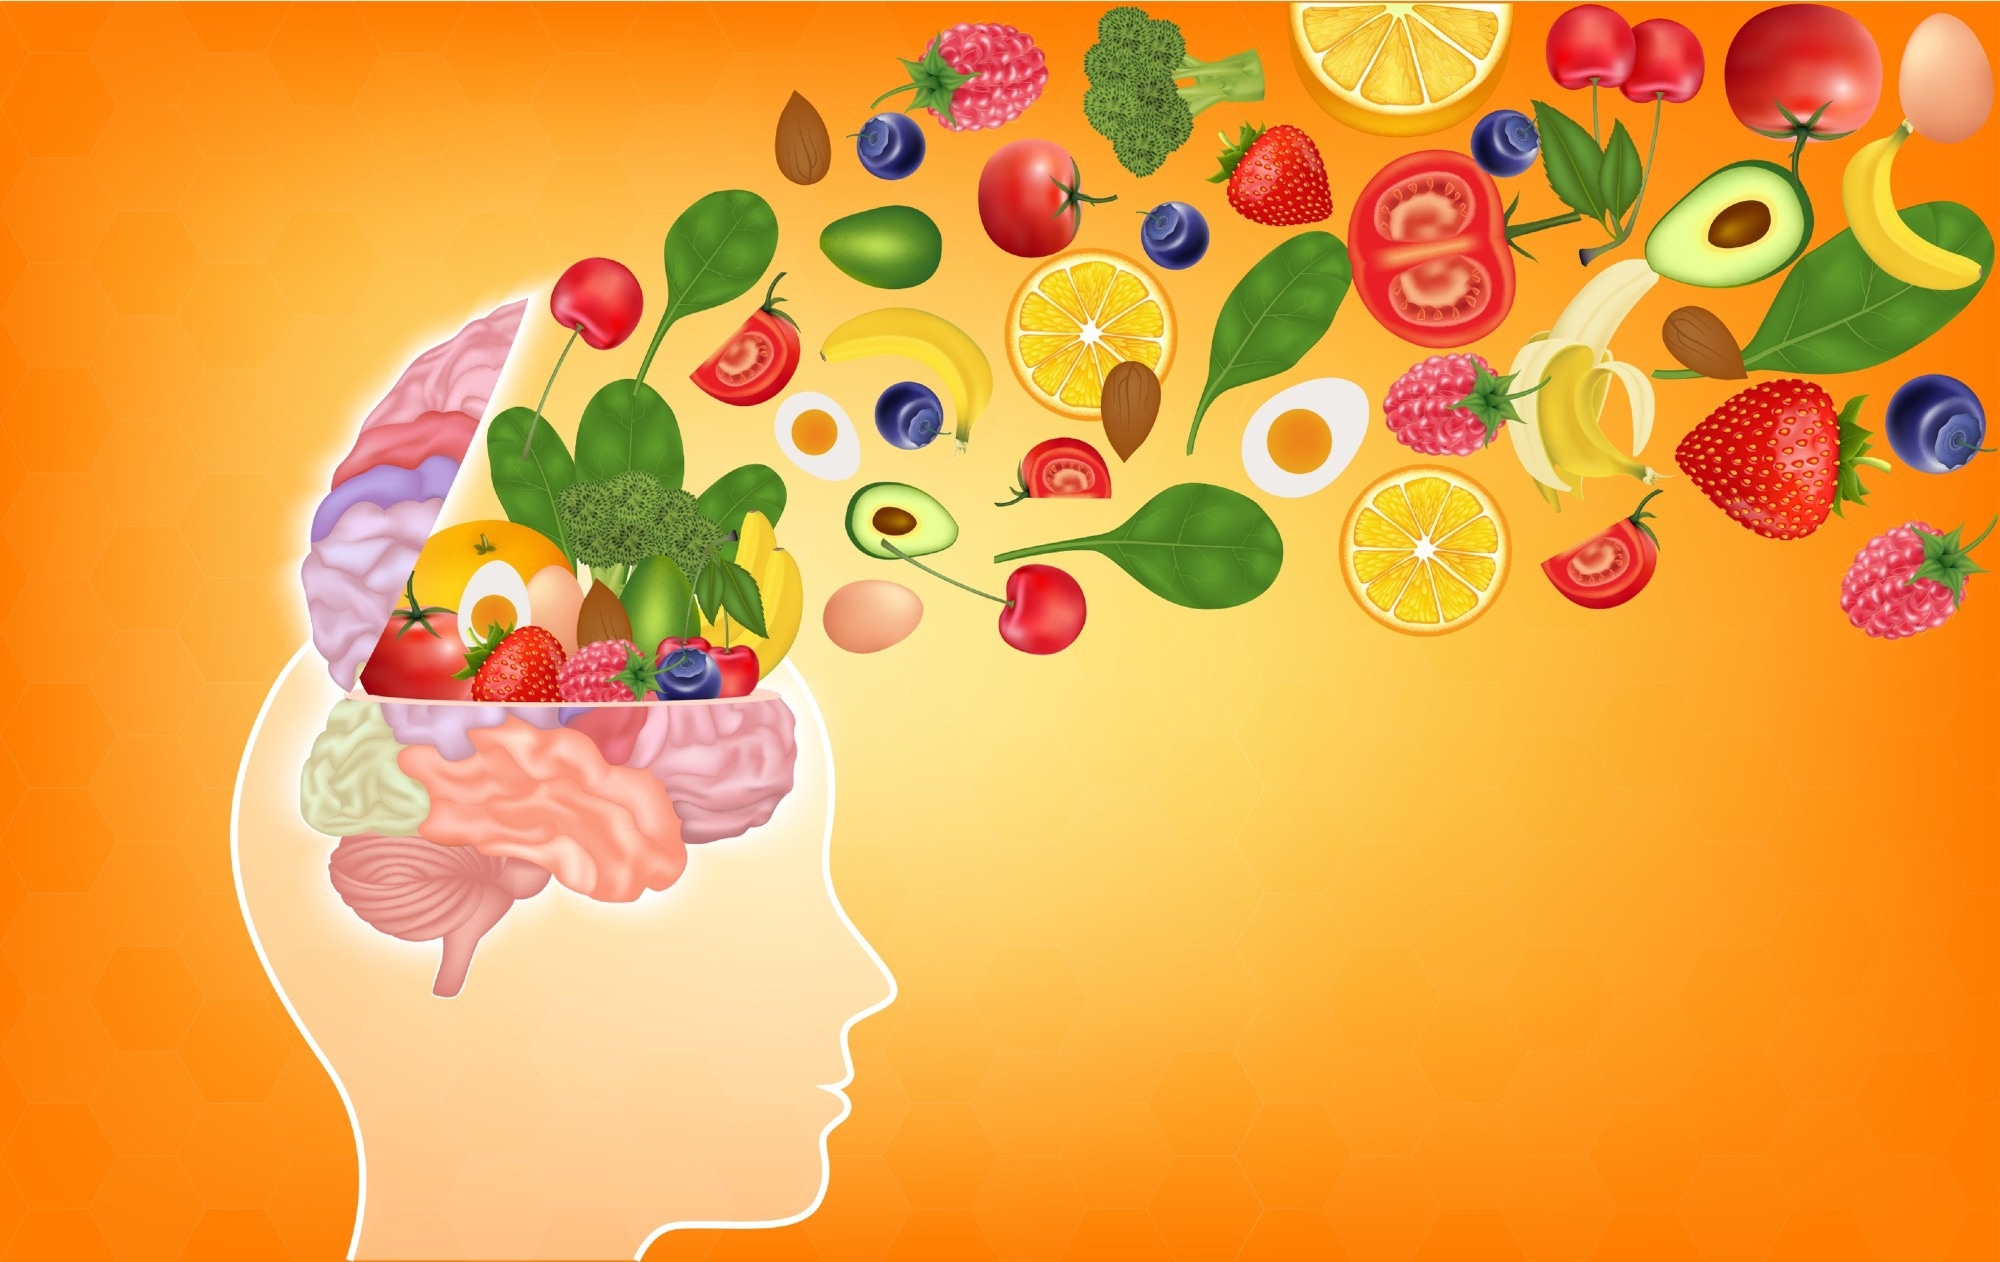 Study: An investigation into the potential association between nutrition and Alzheimer’s disease. Image Credit: Adisak Riwkratok / Shutterstock